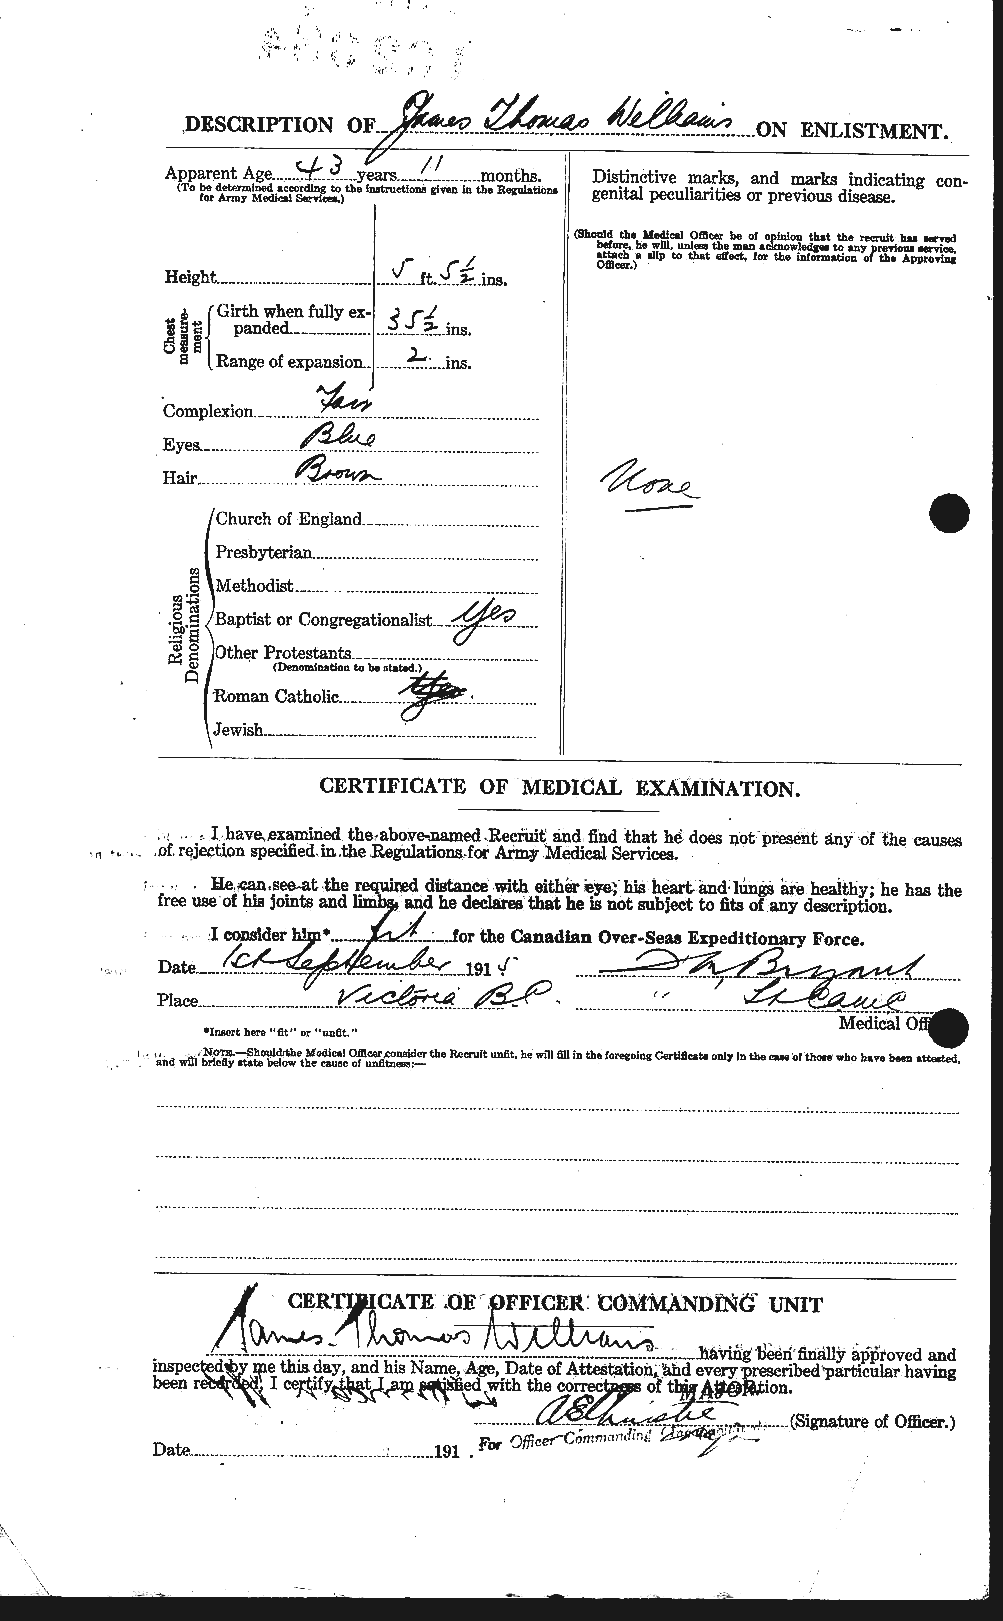 Personnel Records of the First World War - CEF 677561b